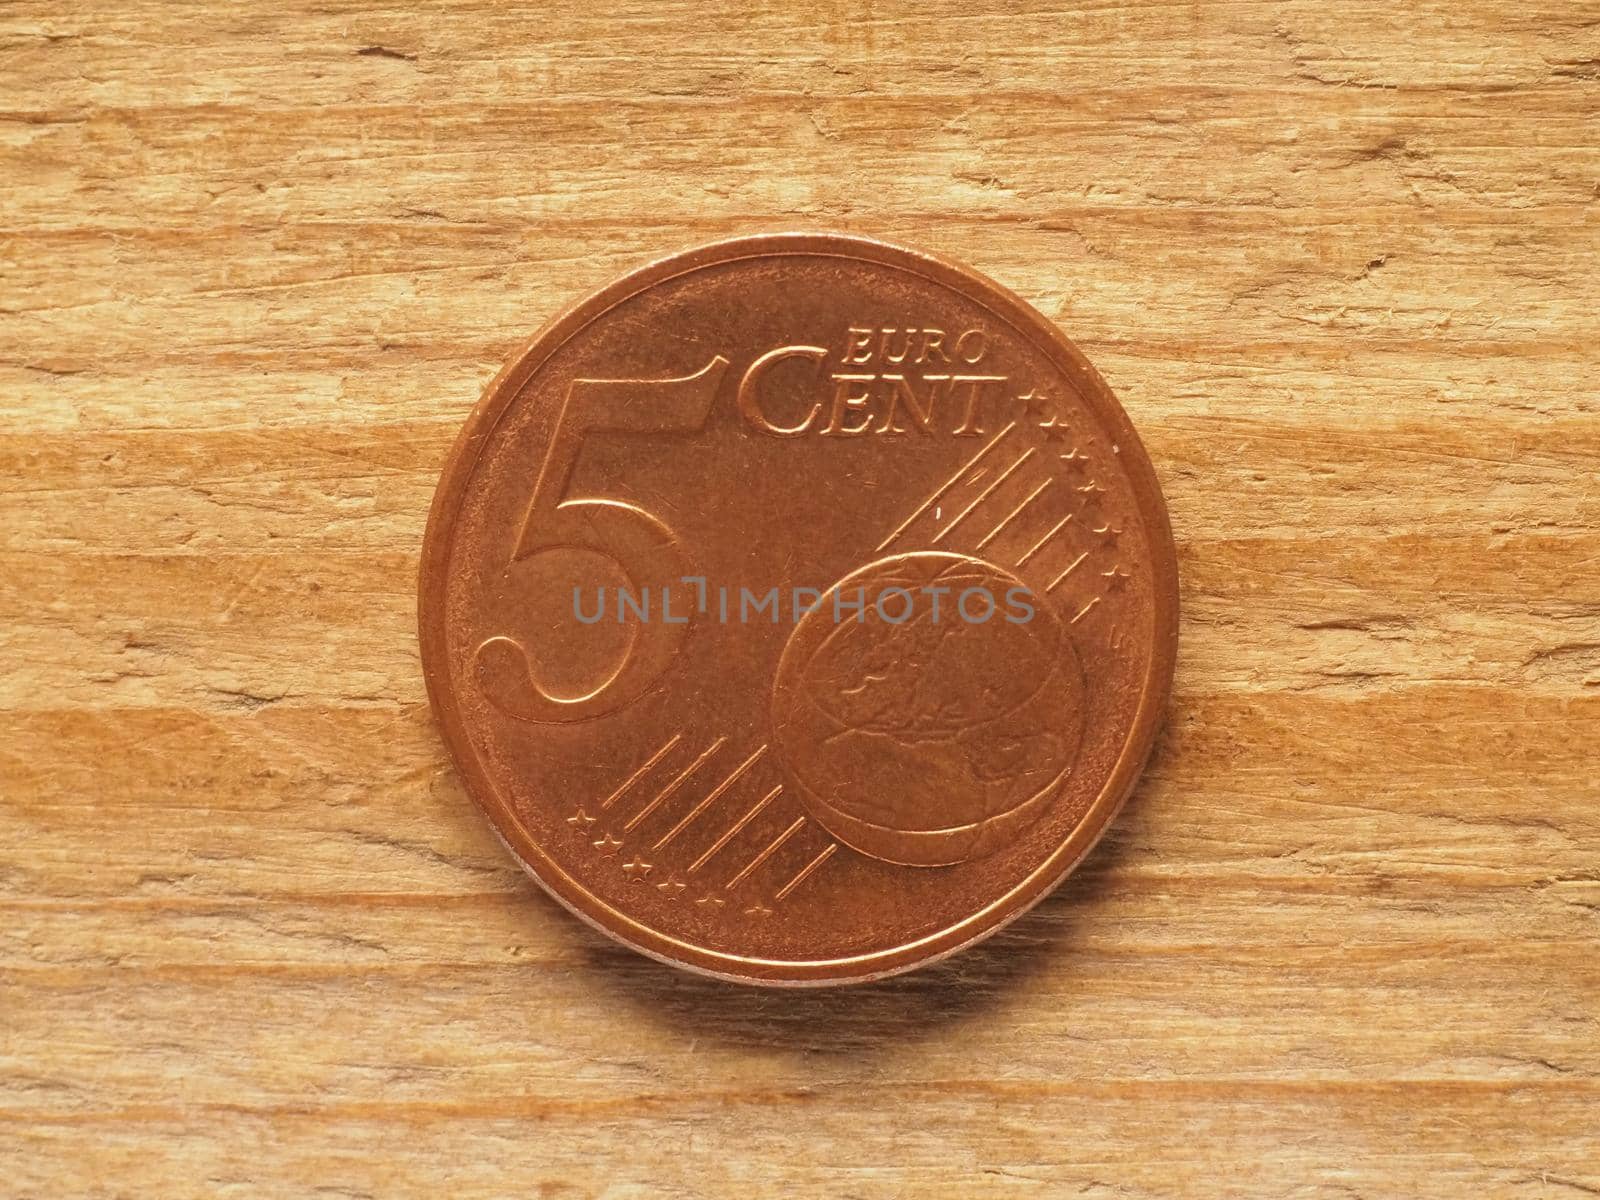 five cent coin common side, currency of the European Union